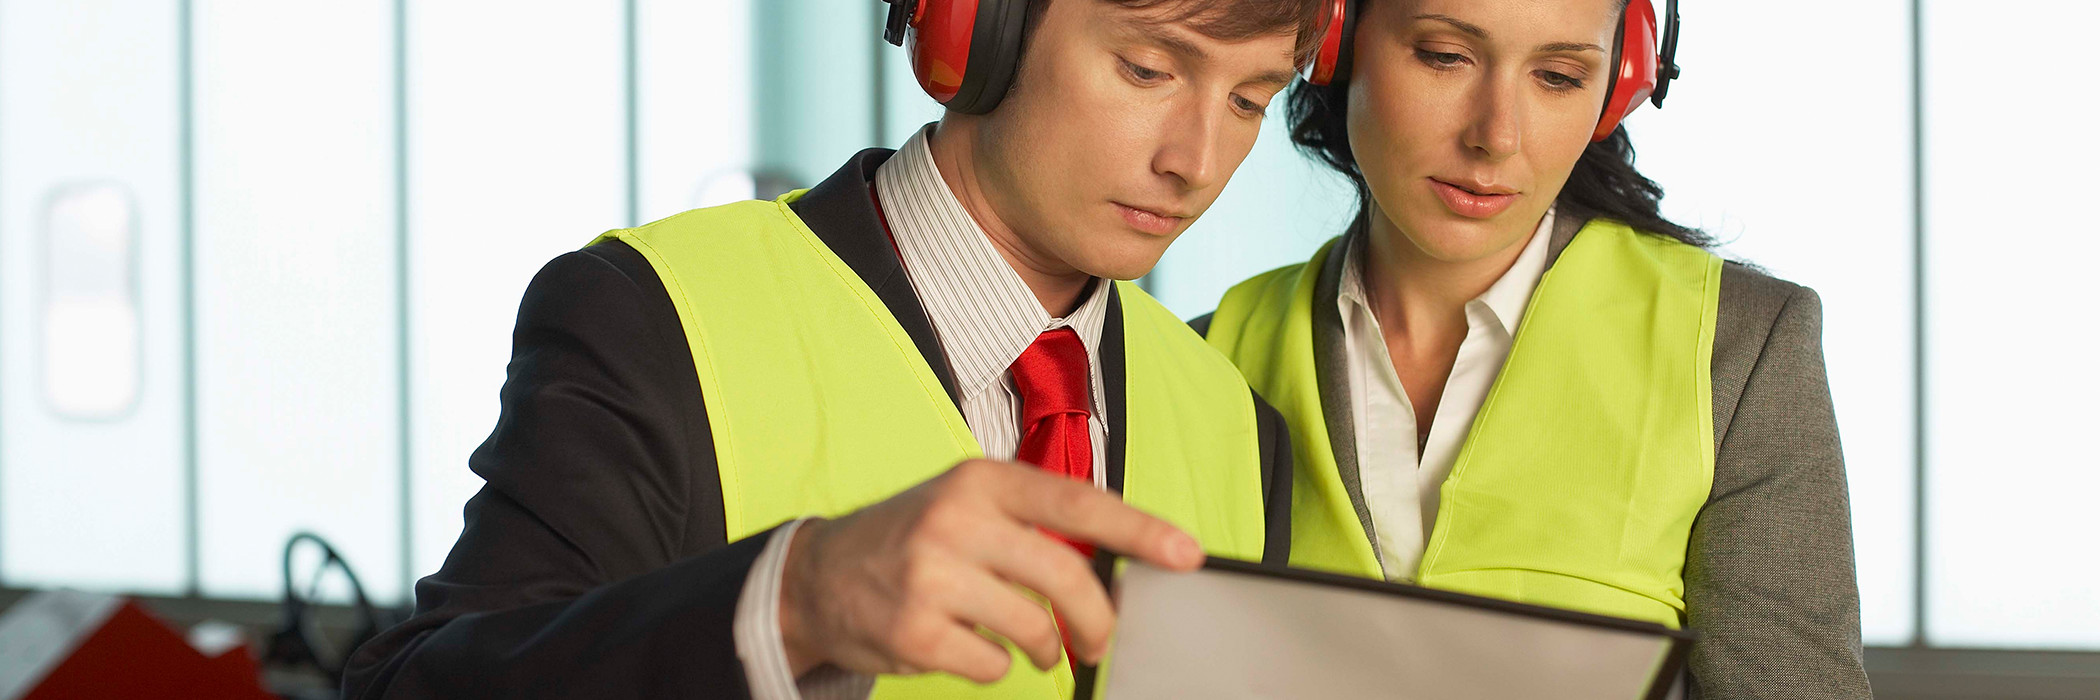 Two businesspeople consulting while wearing safety earmuffs and vests